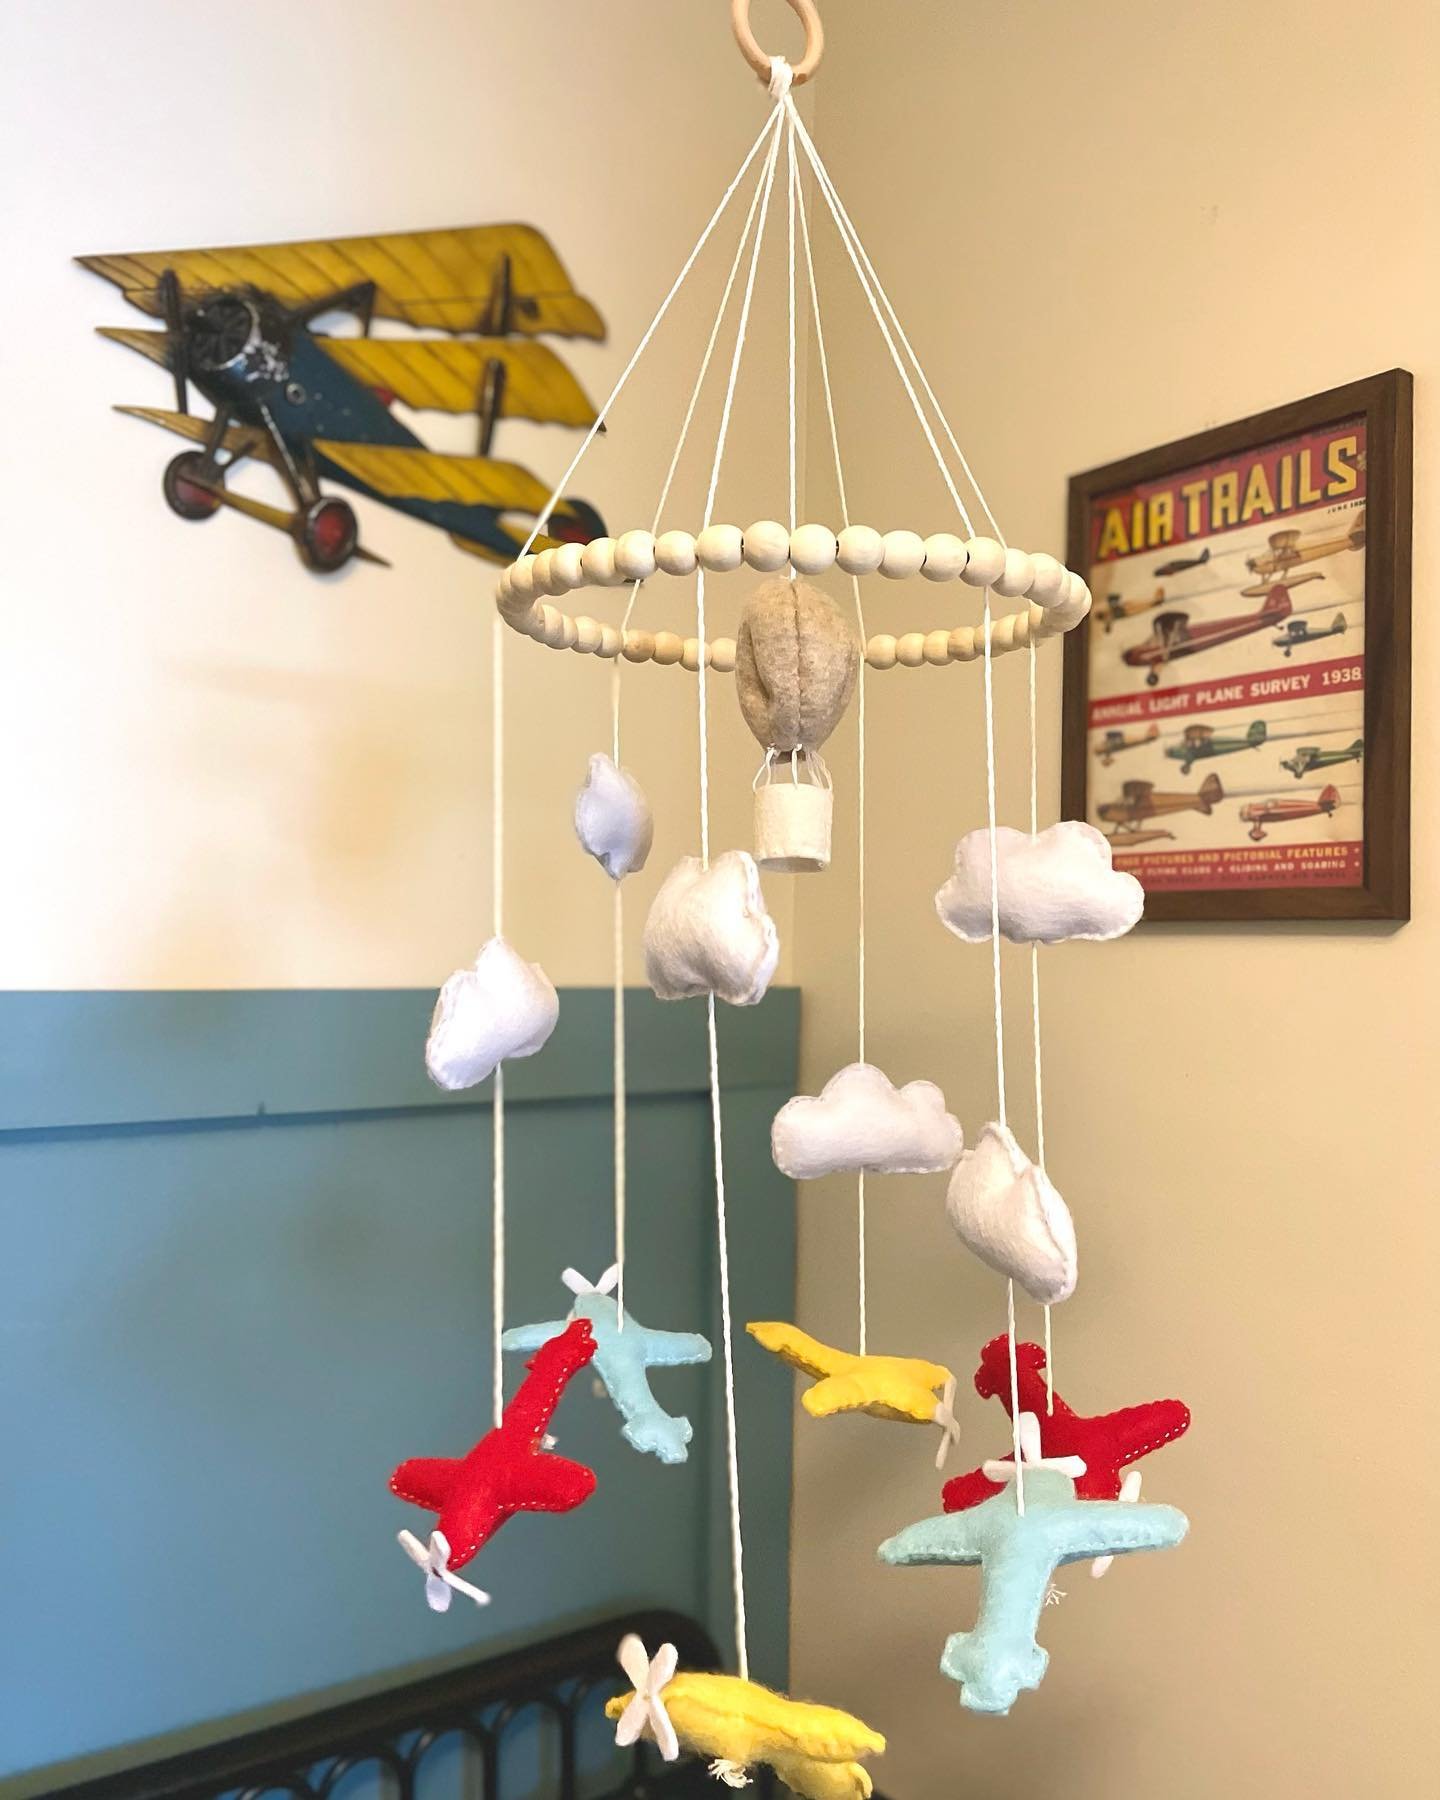 Hi friends, I&rsquo;m thinking about opening up a few spots for custom baby mobile orders. These are a couple I made for my baby and family members. I can work with you to coordinate your nursery theme! If you&rsquo;re interested, comment with a ❤️

